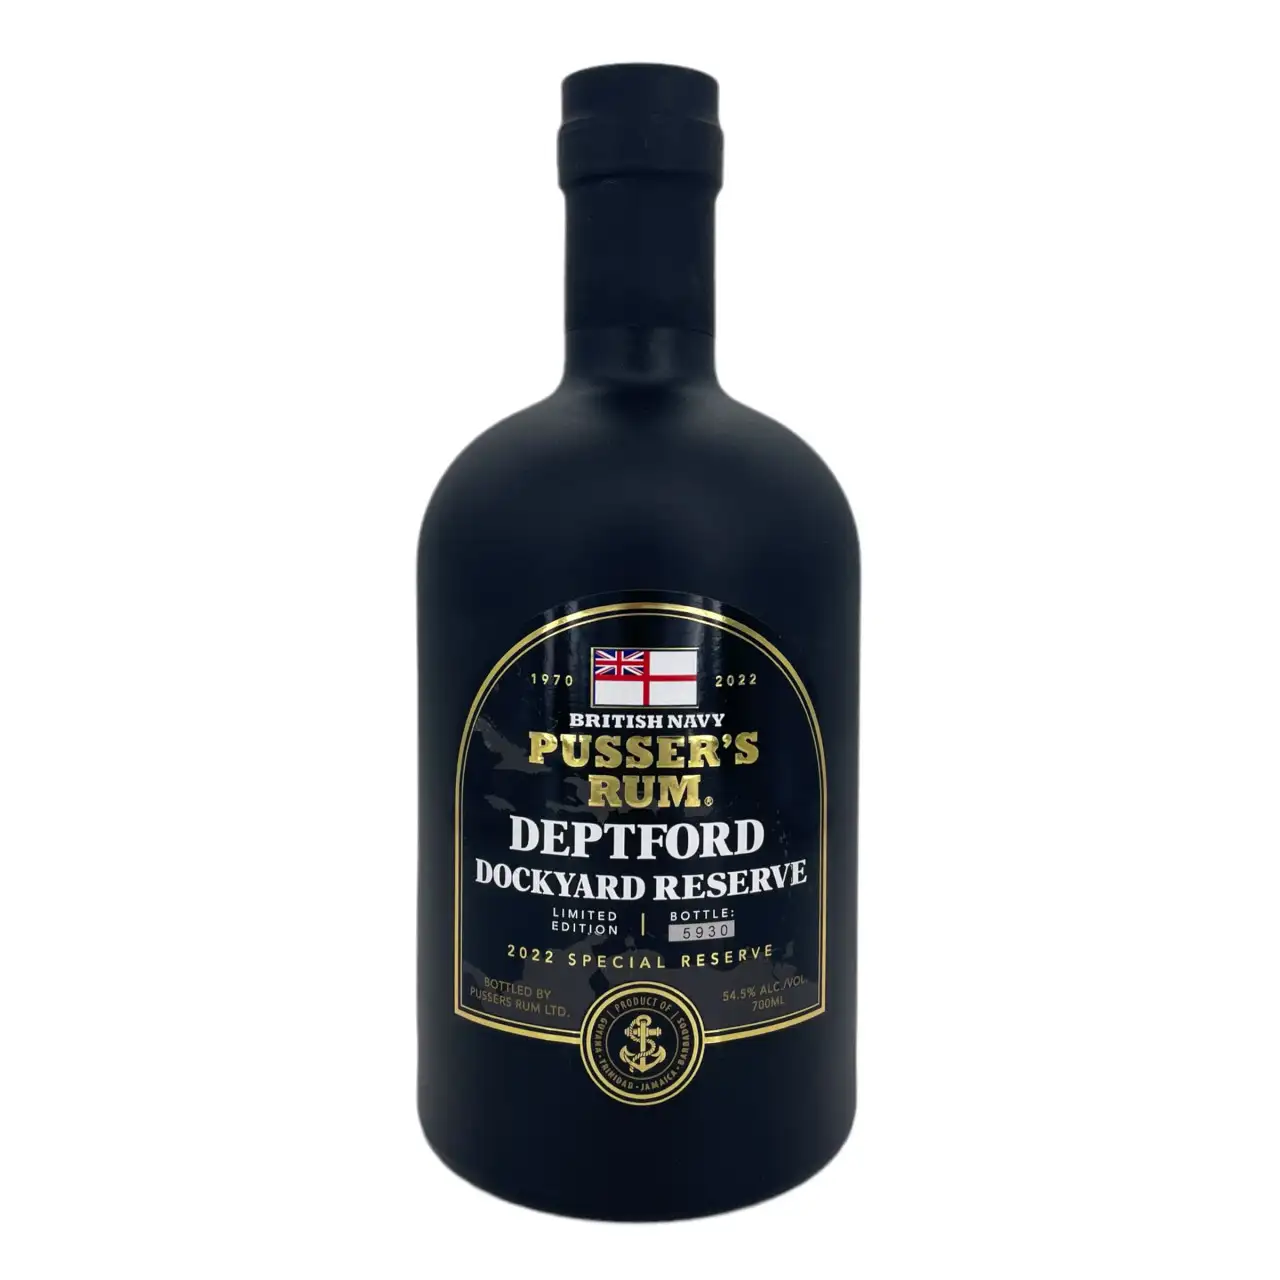 Image of the front of the bottle of the rum Deptford Dockyard Reserve